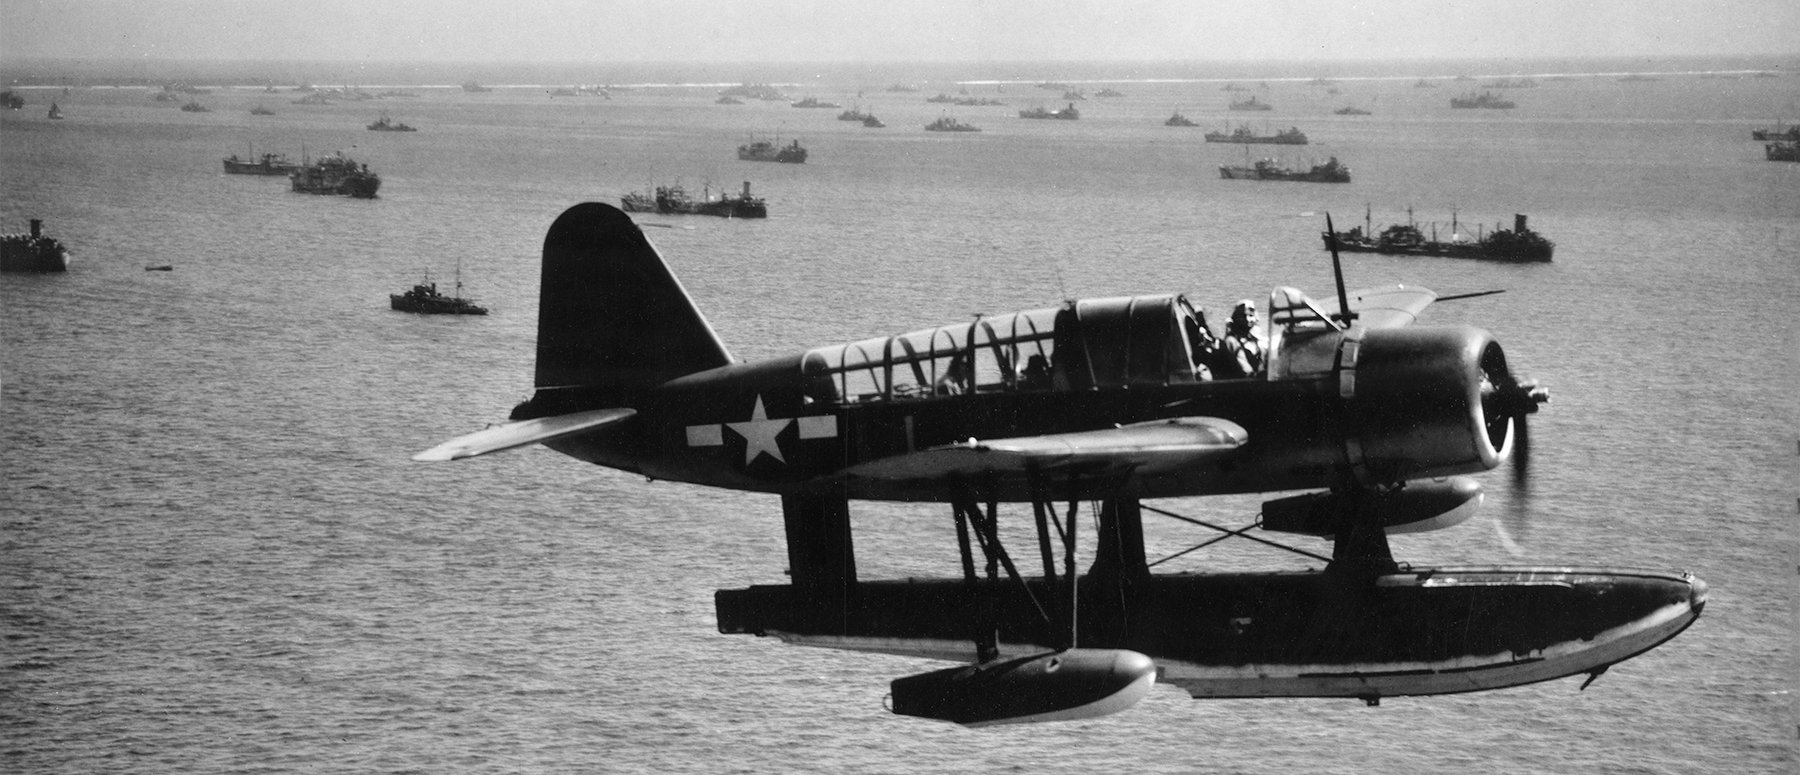 An OS2U-3 Kingfisher seaplane on the USS Indianapolis (CA-35). Seaplanes were critical during World War II. Today, the U.S. military does not own a single one. 